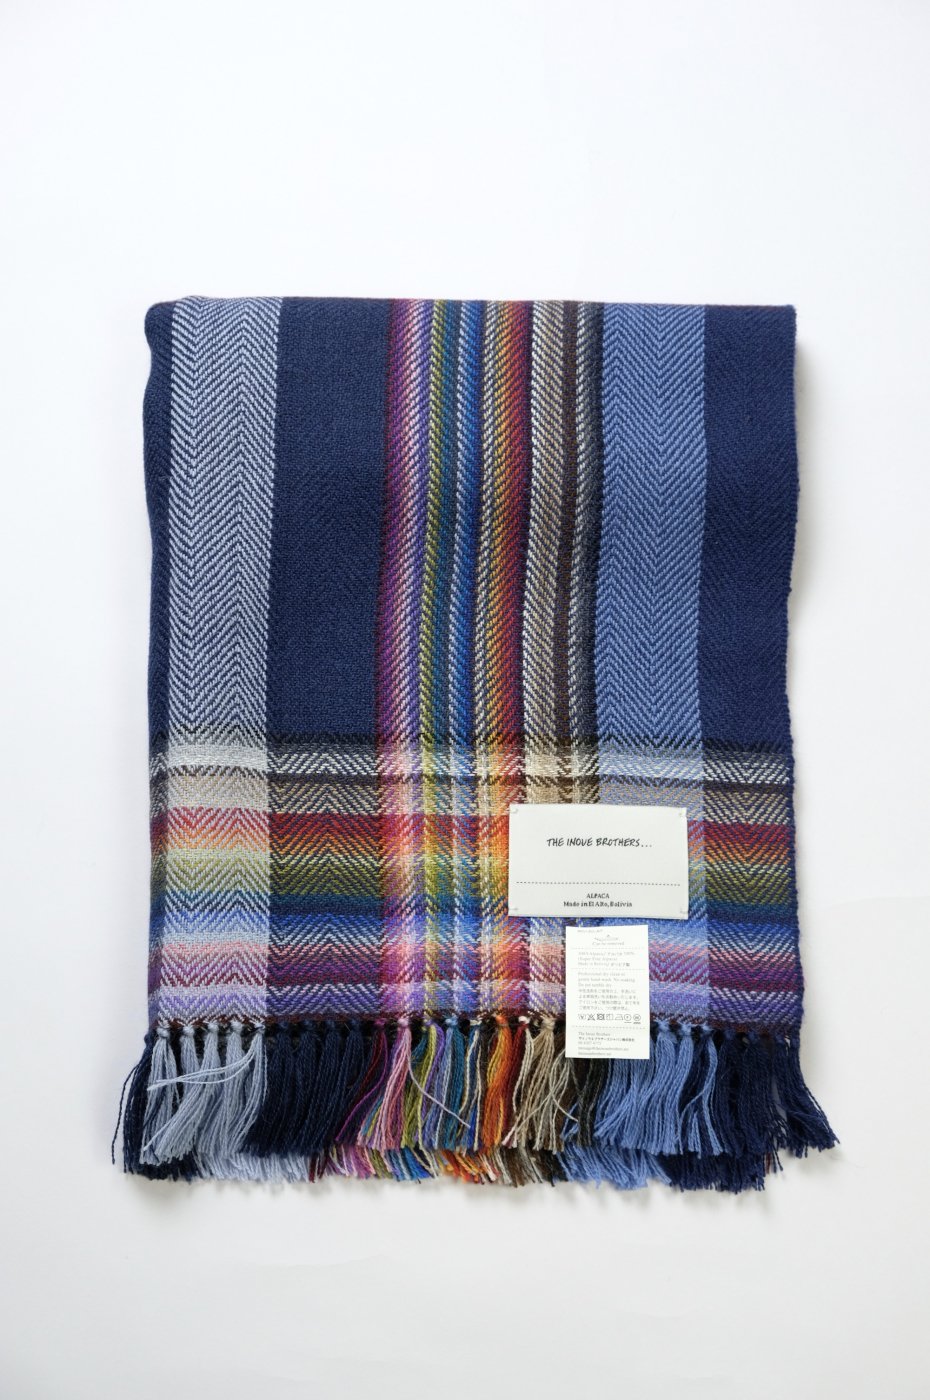 THE INOUE BROTHERS... "Multi Coloured Scarf / NAVY"